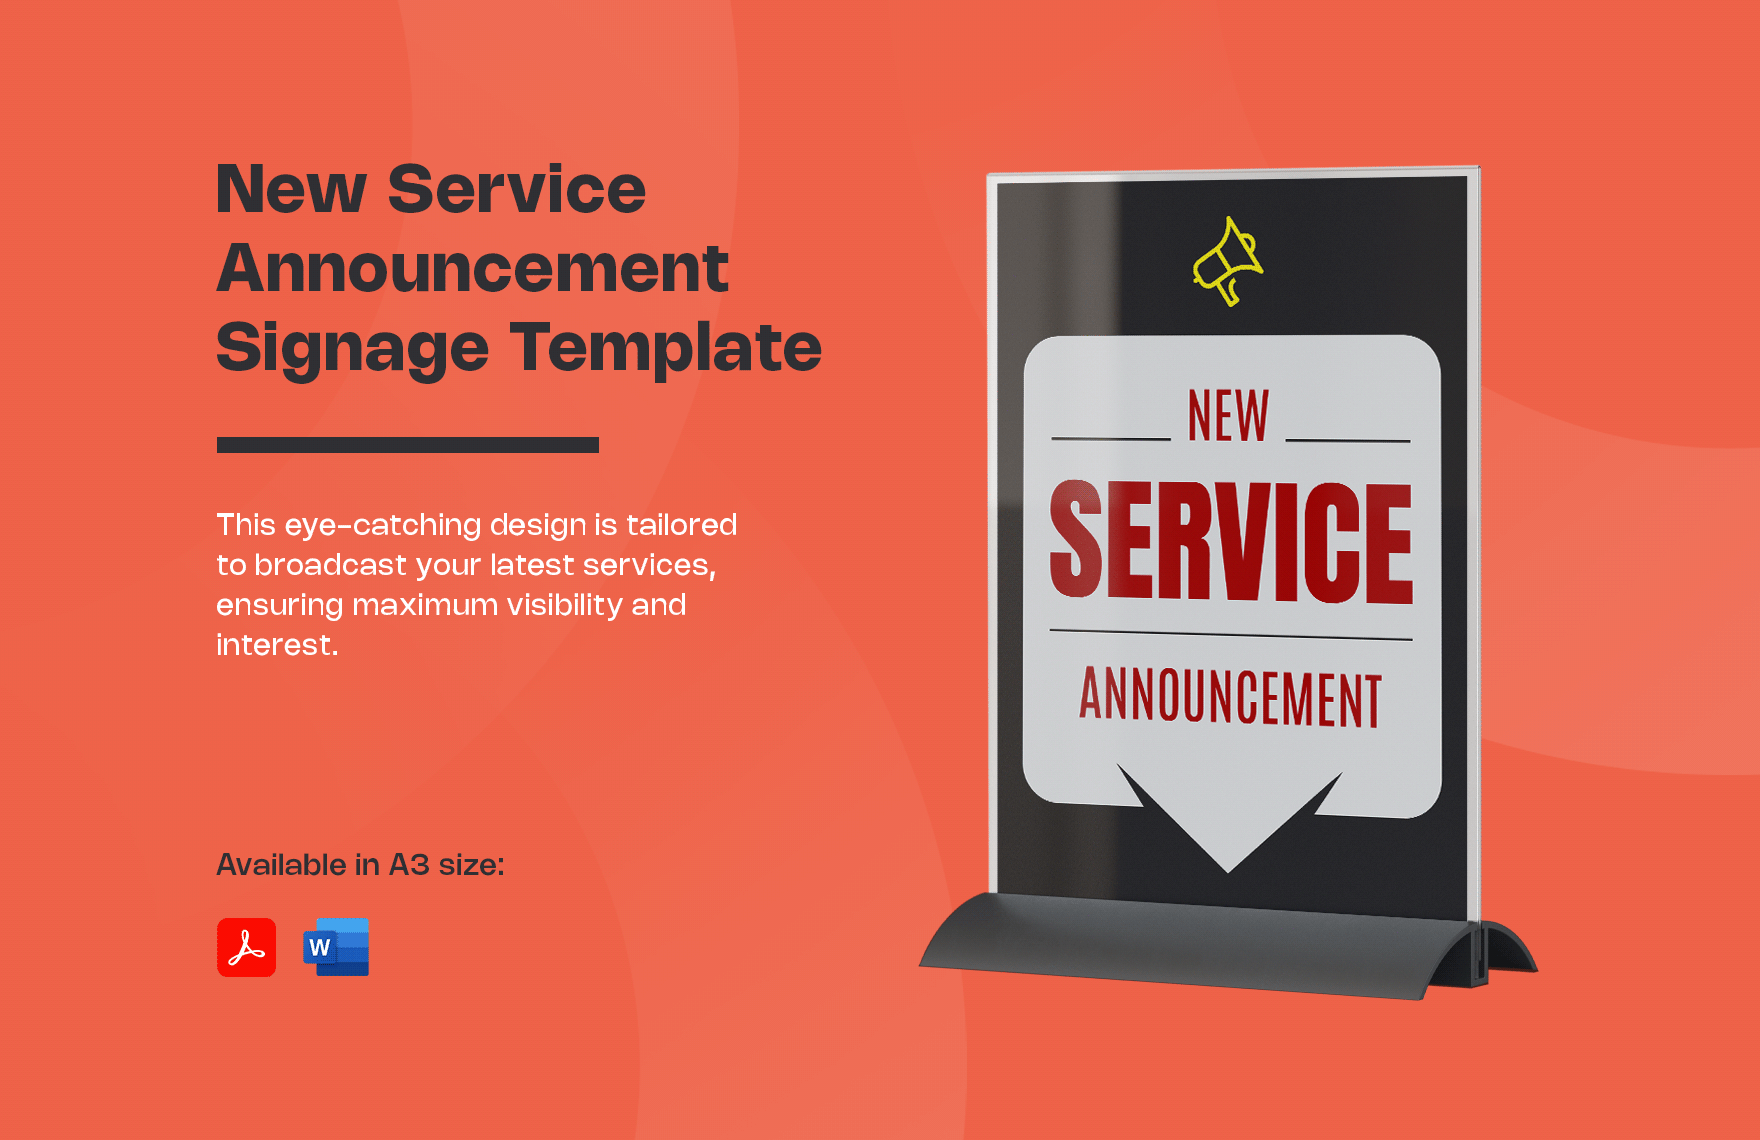 New Service Announcement Signage Template